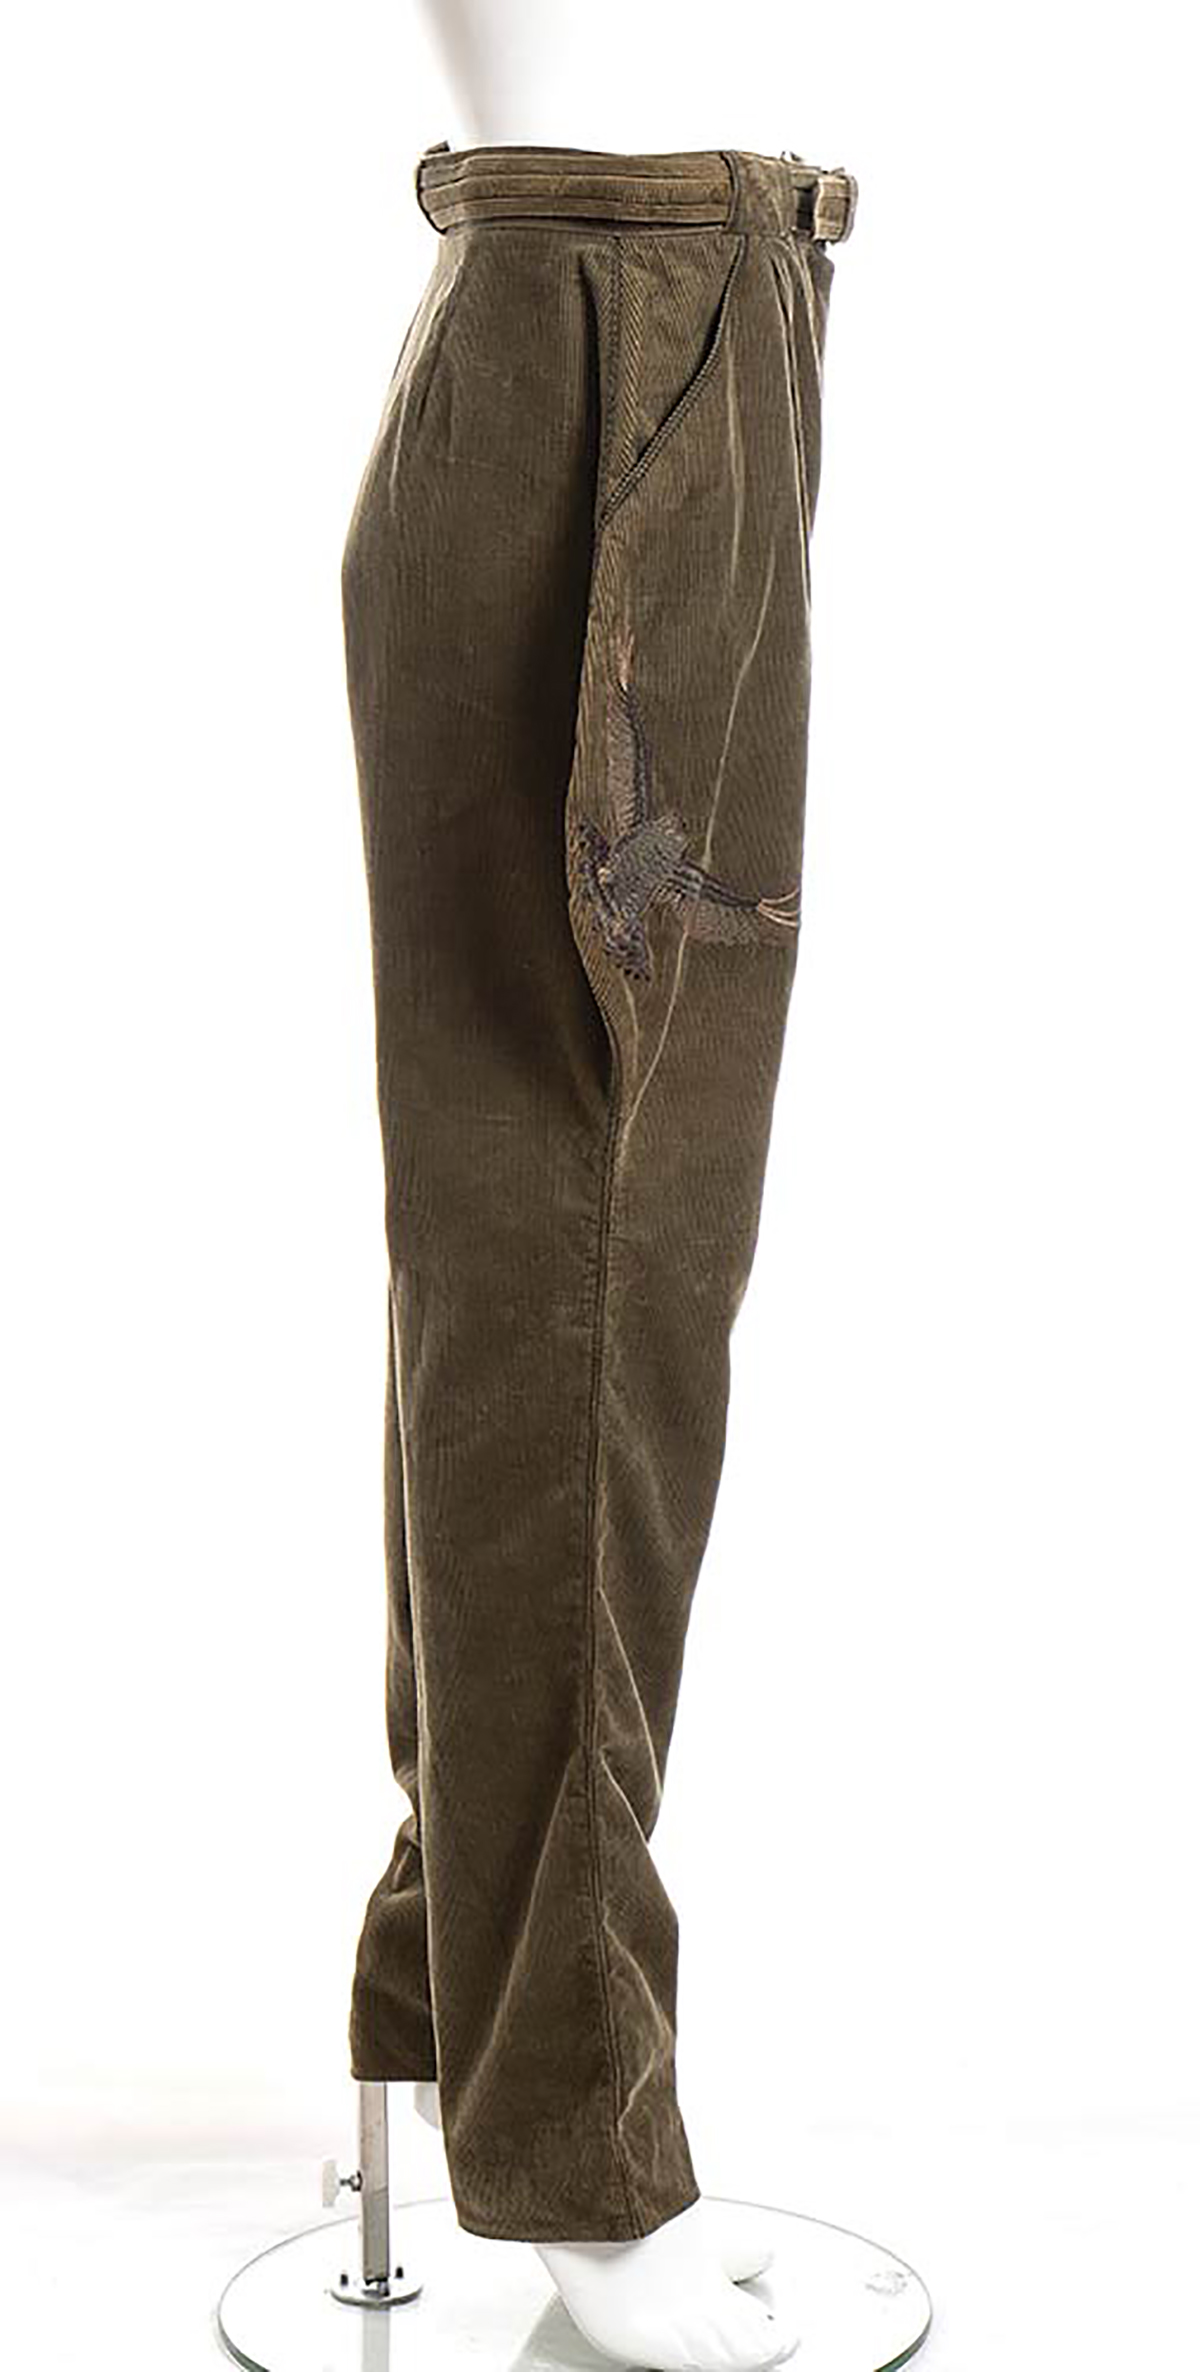 GIANNI VERSACE COTTON TROUSER 1981 ca Cotton corduroy dove gray trouser, side embroidery. General - Image 2 of 5